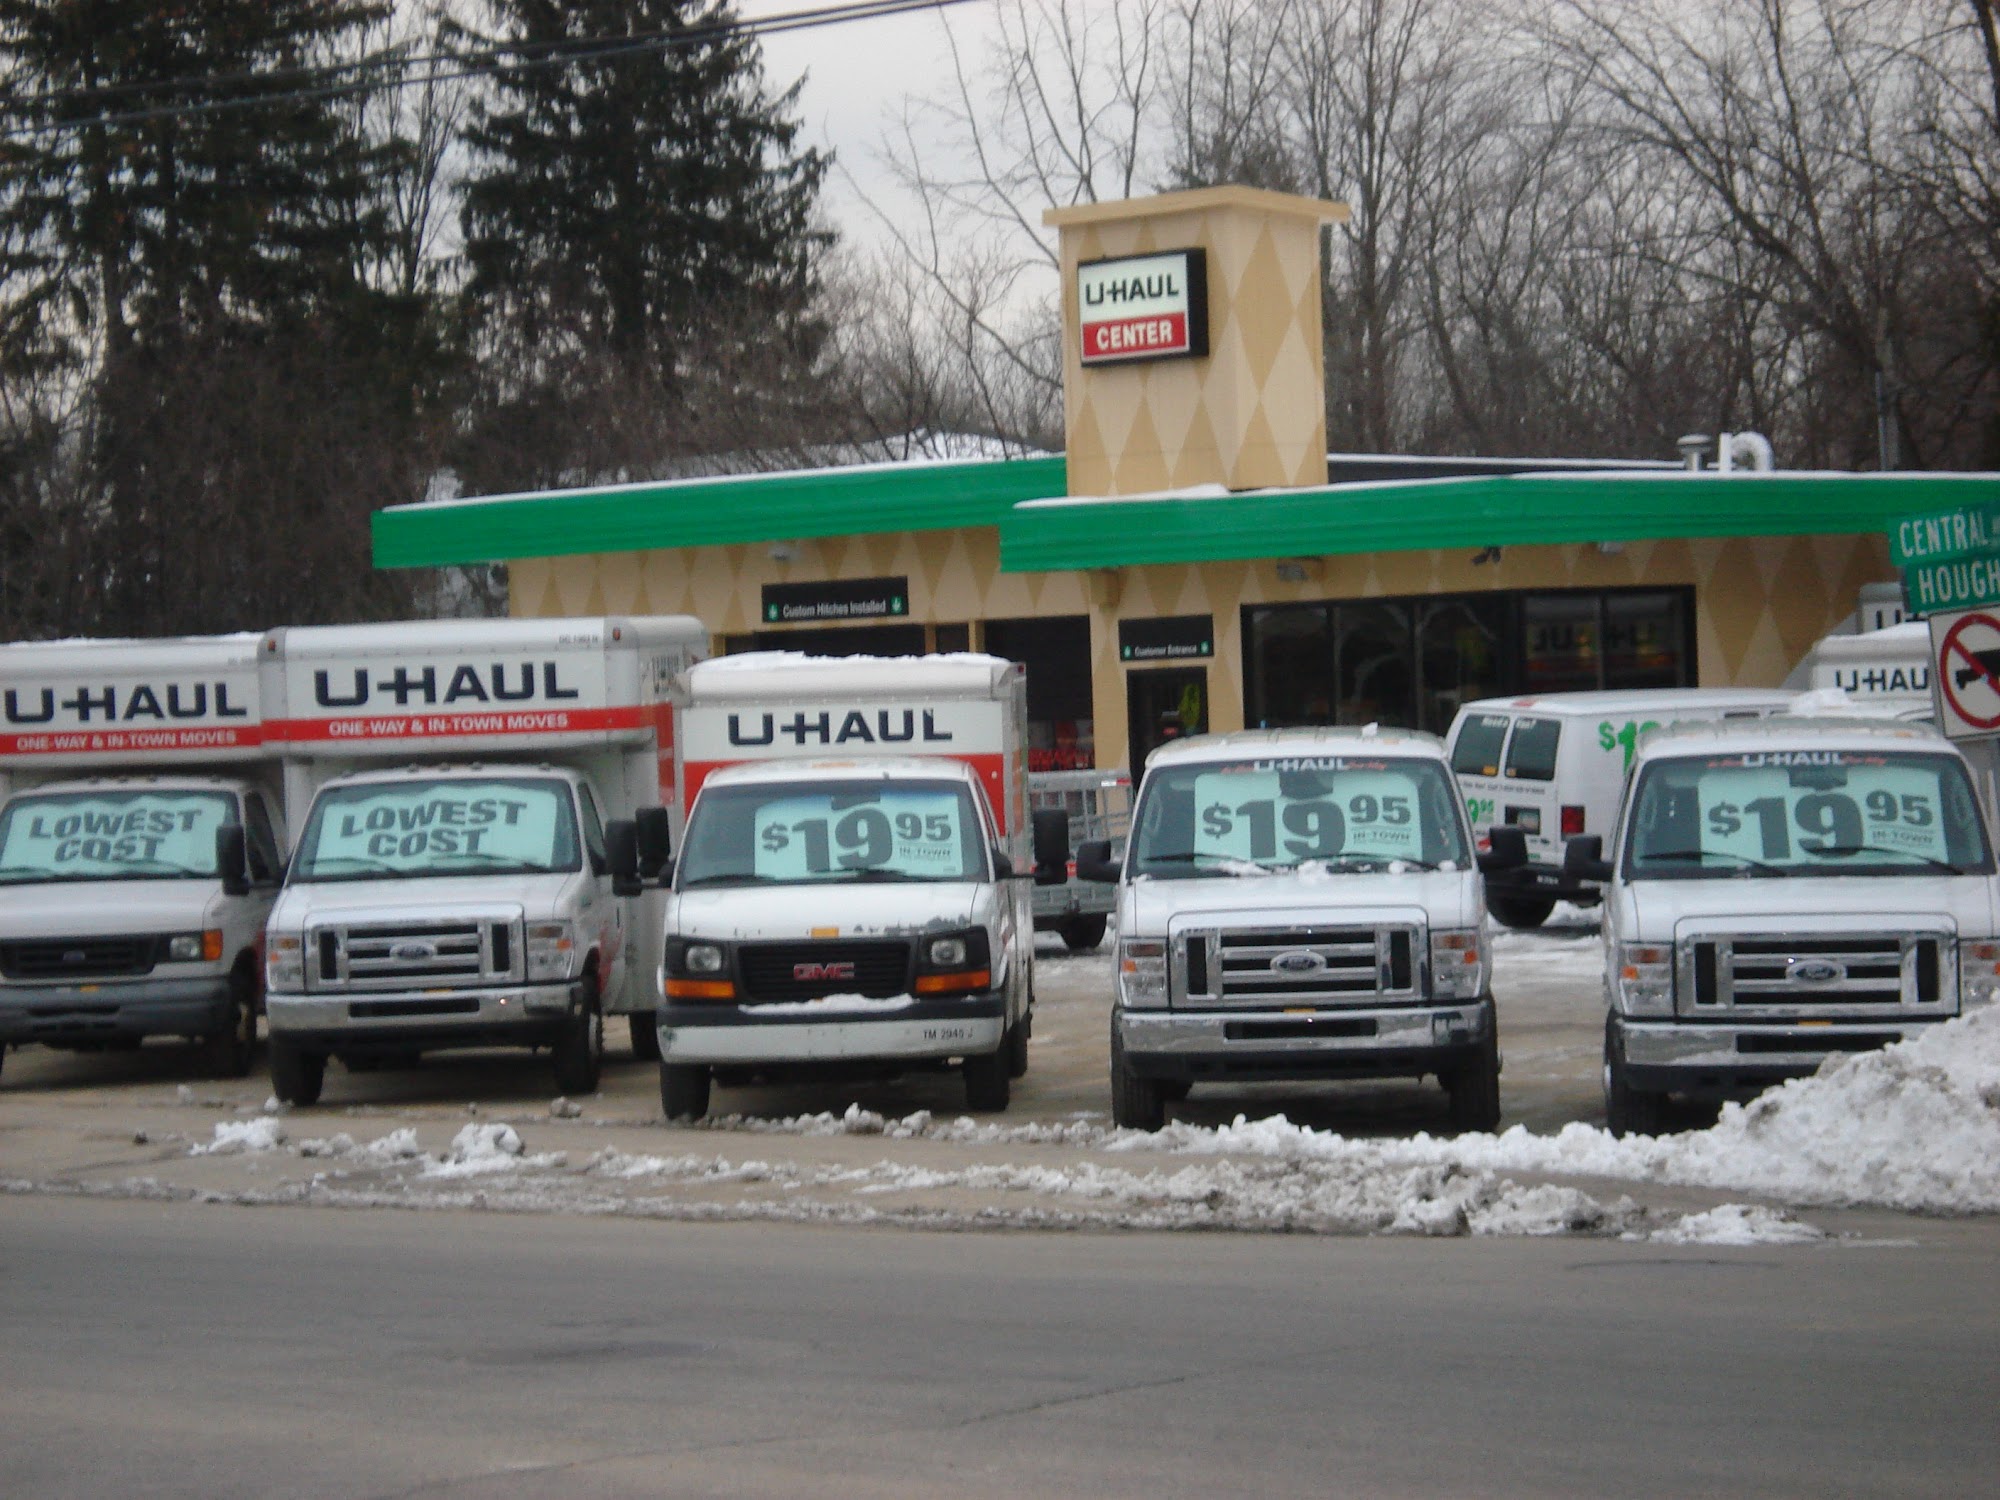 U-Haul at Central Ave